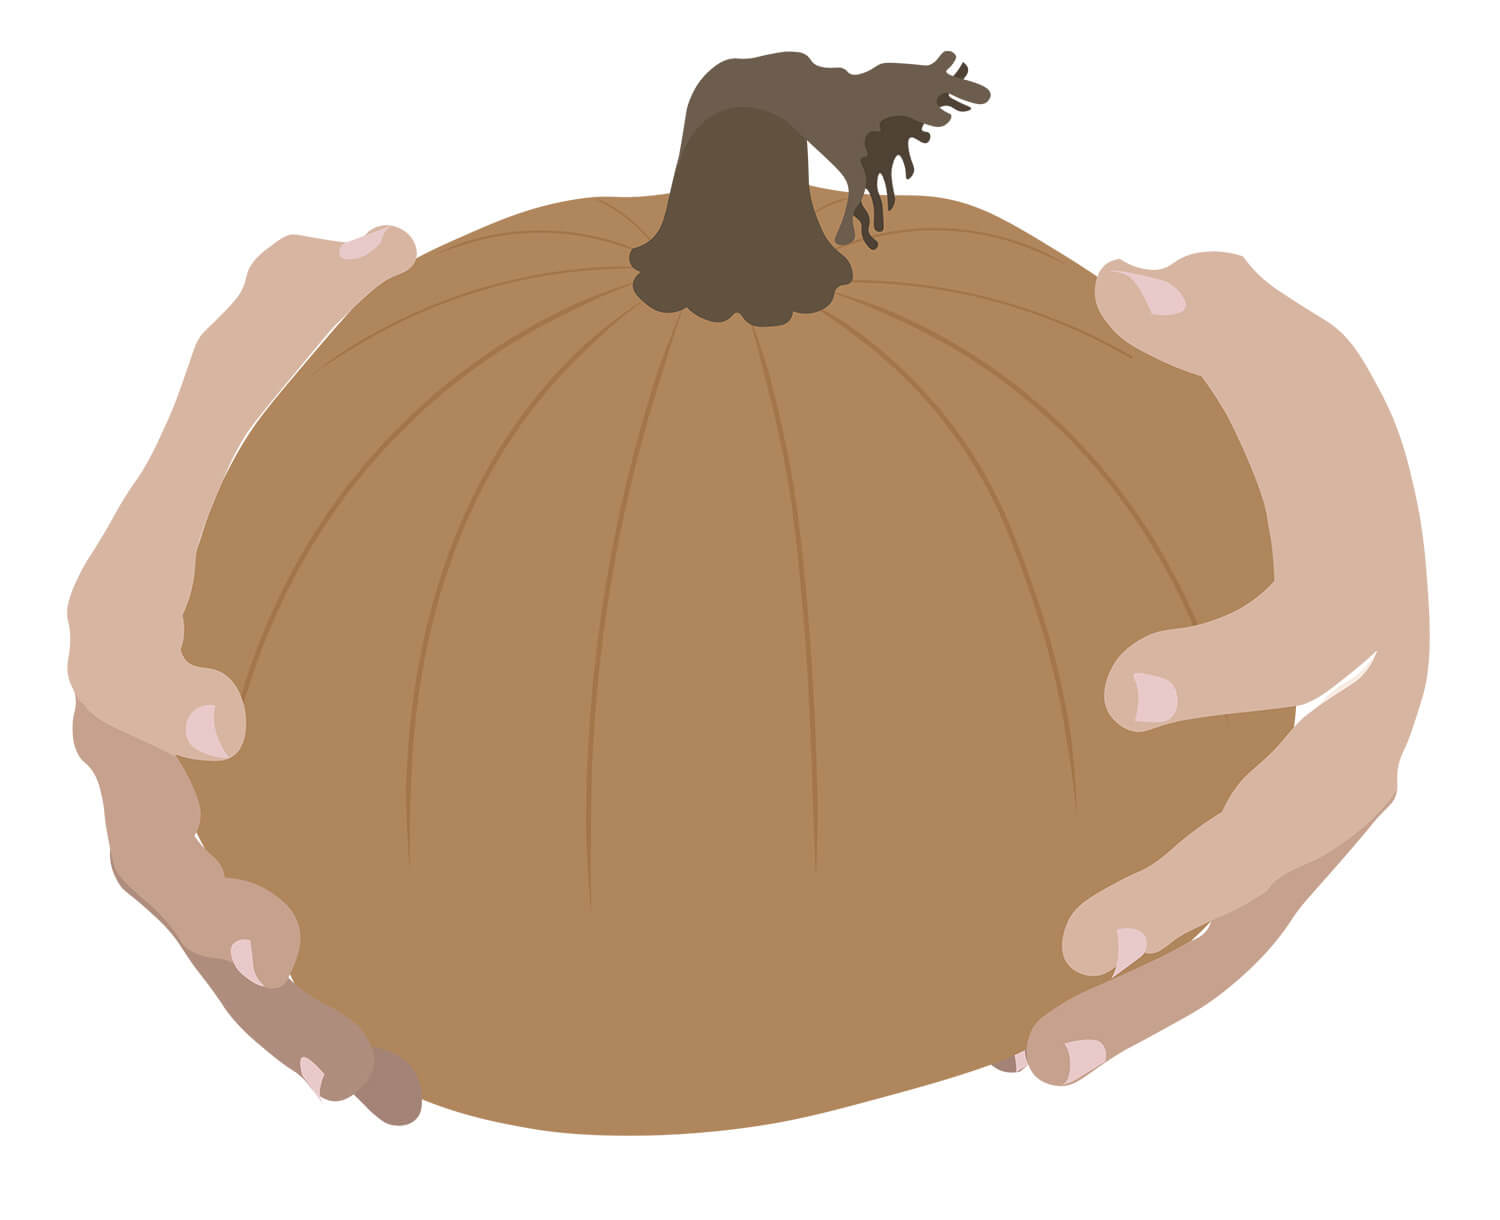 Illustrated pumpkin and two hands